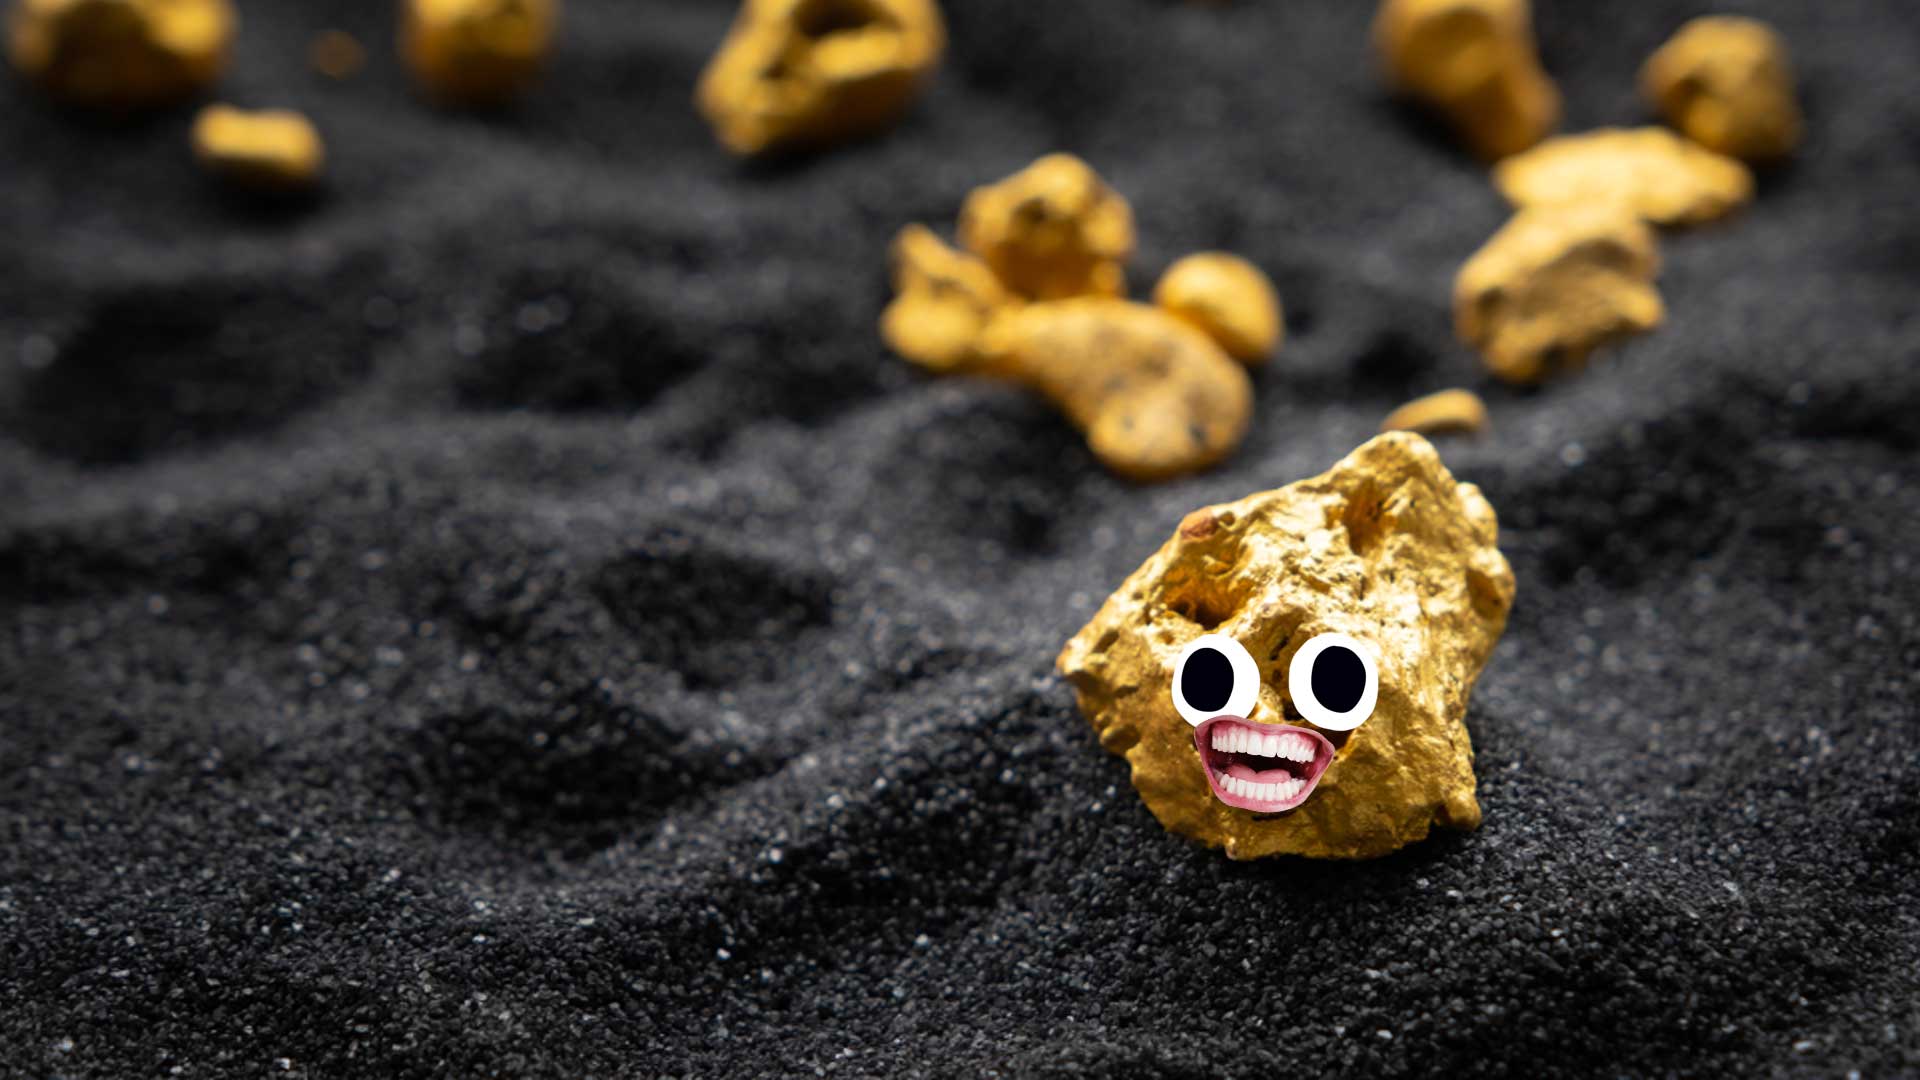 Gold nuggets